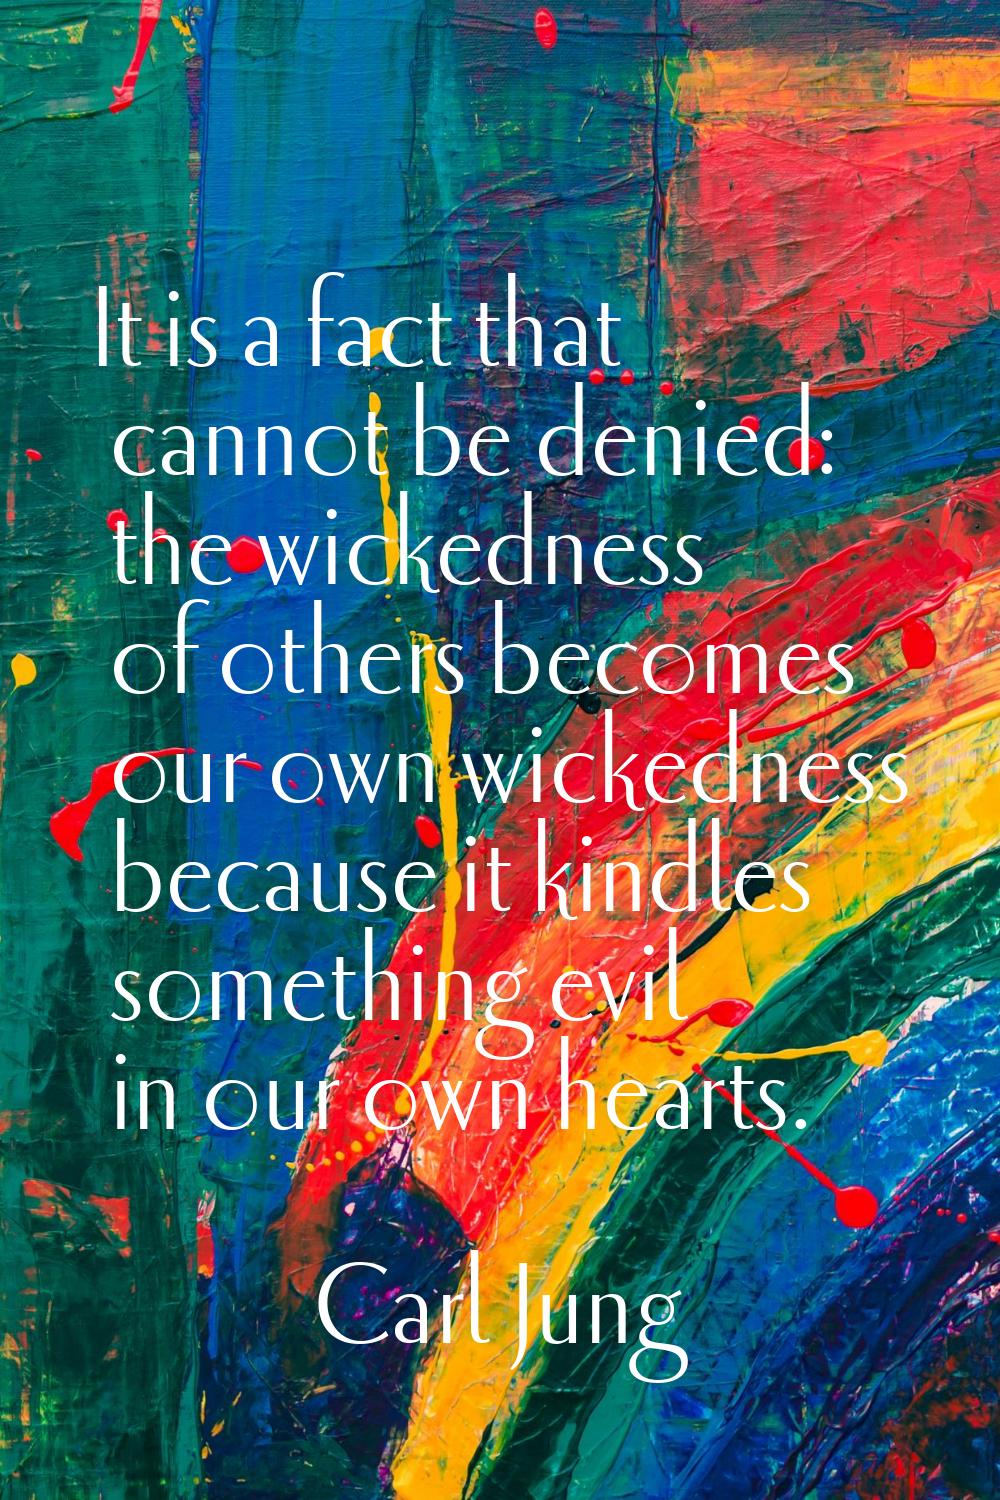 It is a fact that cannot be denied: the wickedness of others becomes our own wickedness because it 